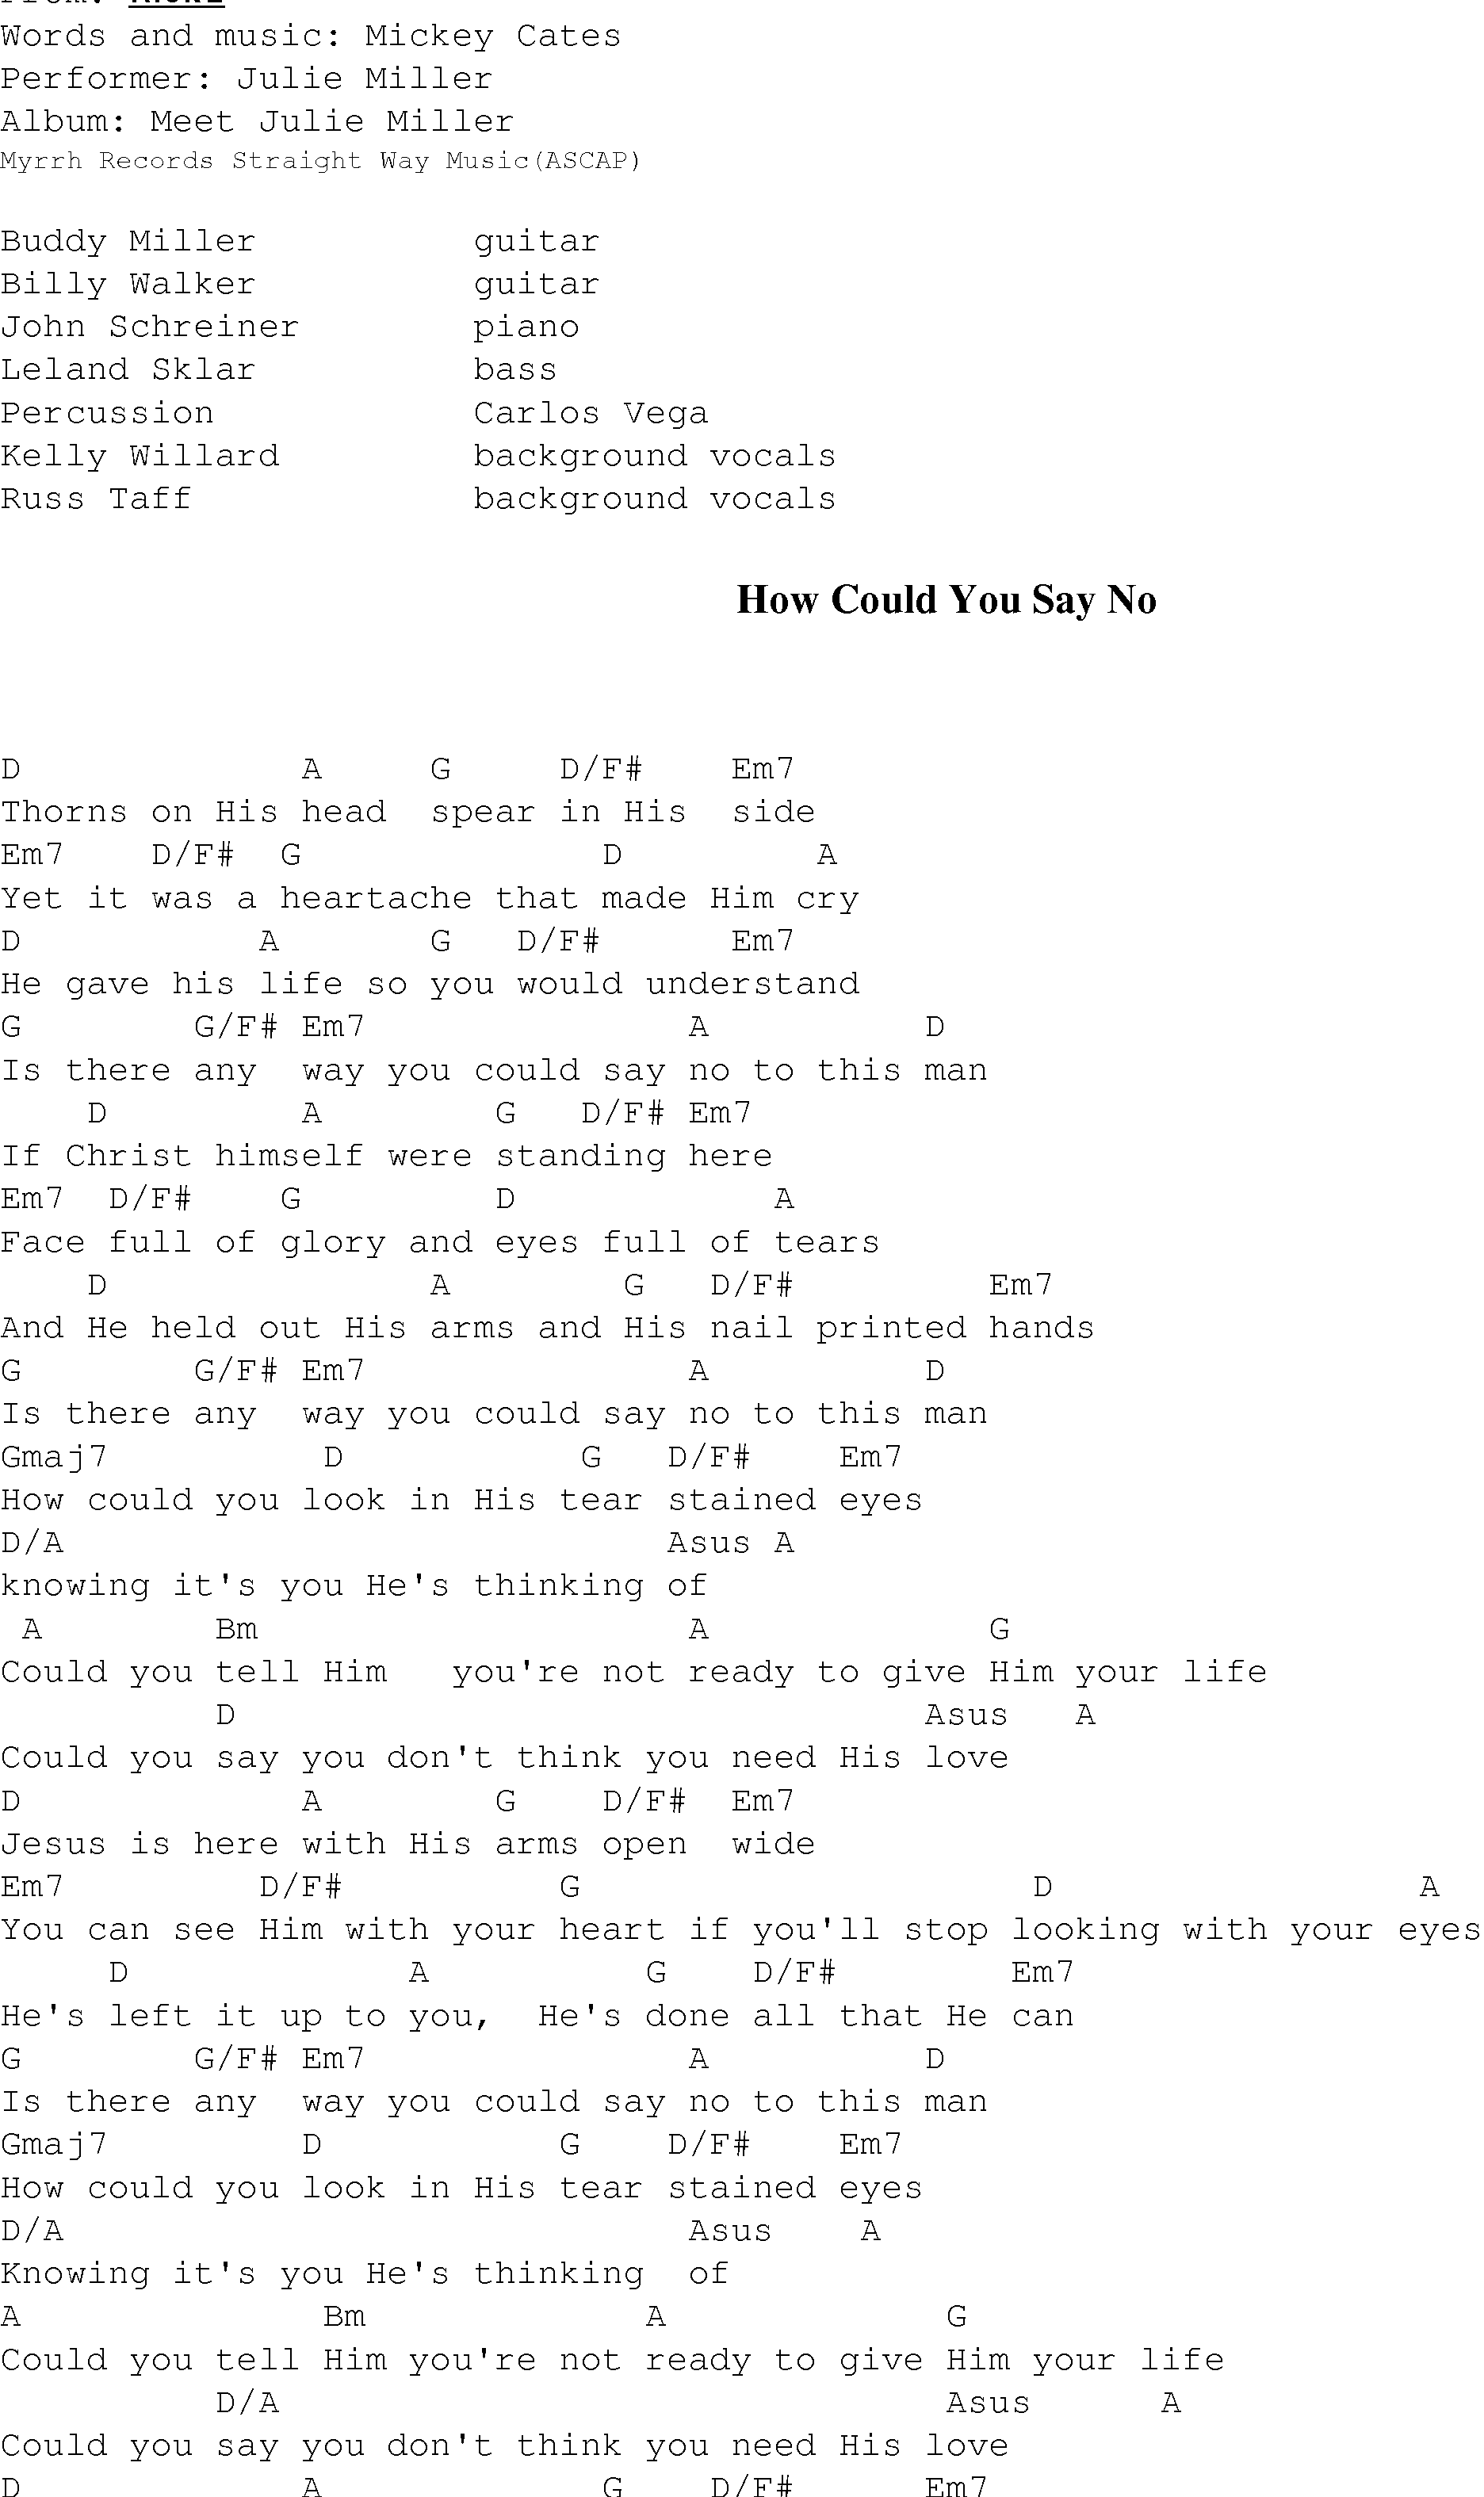 Gospel Song: how_could_you_say_no, lyrics and chords.